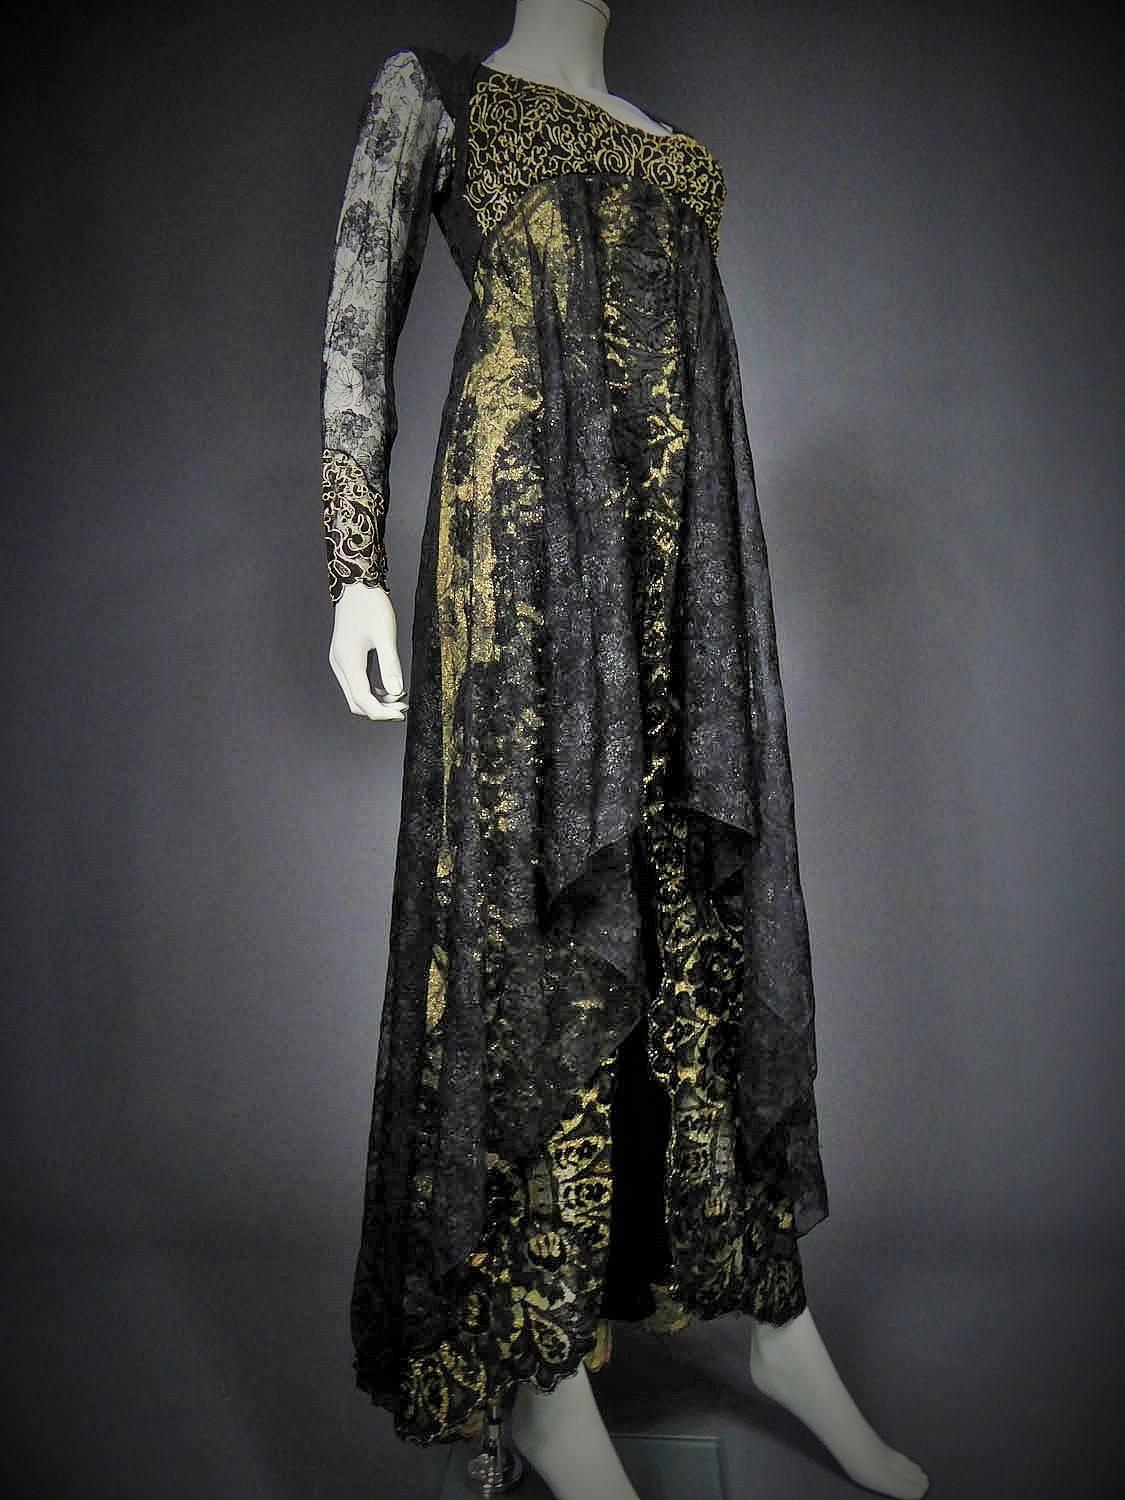 Circa 1988 - 1992

France

Evening dress Christian Lacroix Haute Couture from the beginning of the chic gothic movement dating back to the end of the 80s. Cream tulle background embroidered with gold lurex flowers and black calais lace on the dress.